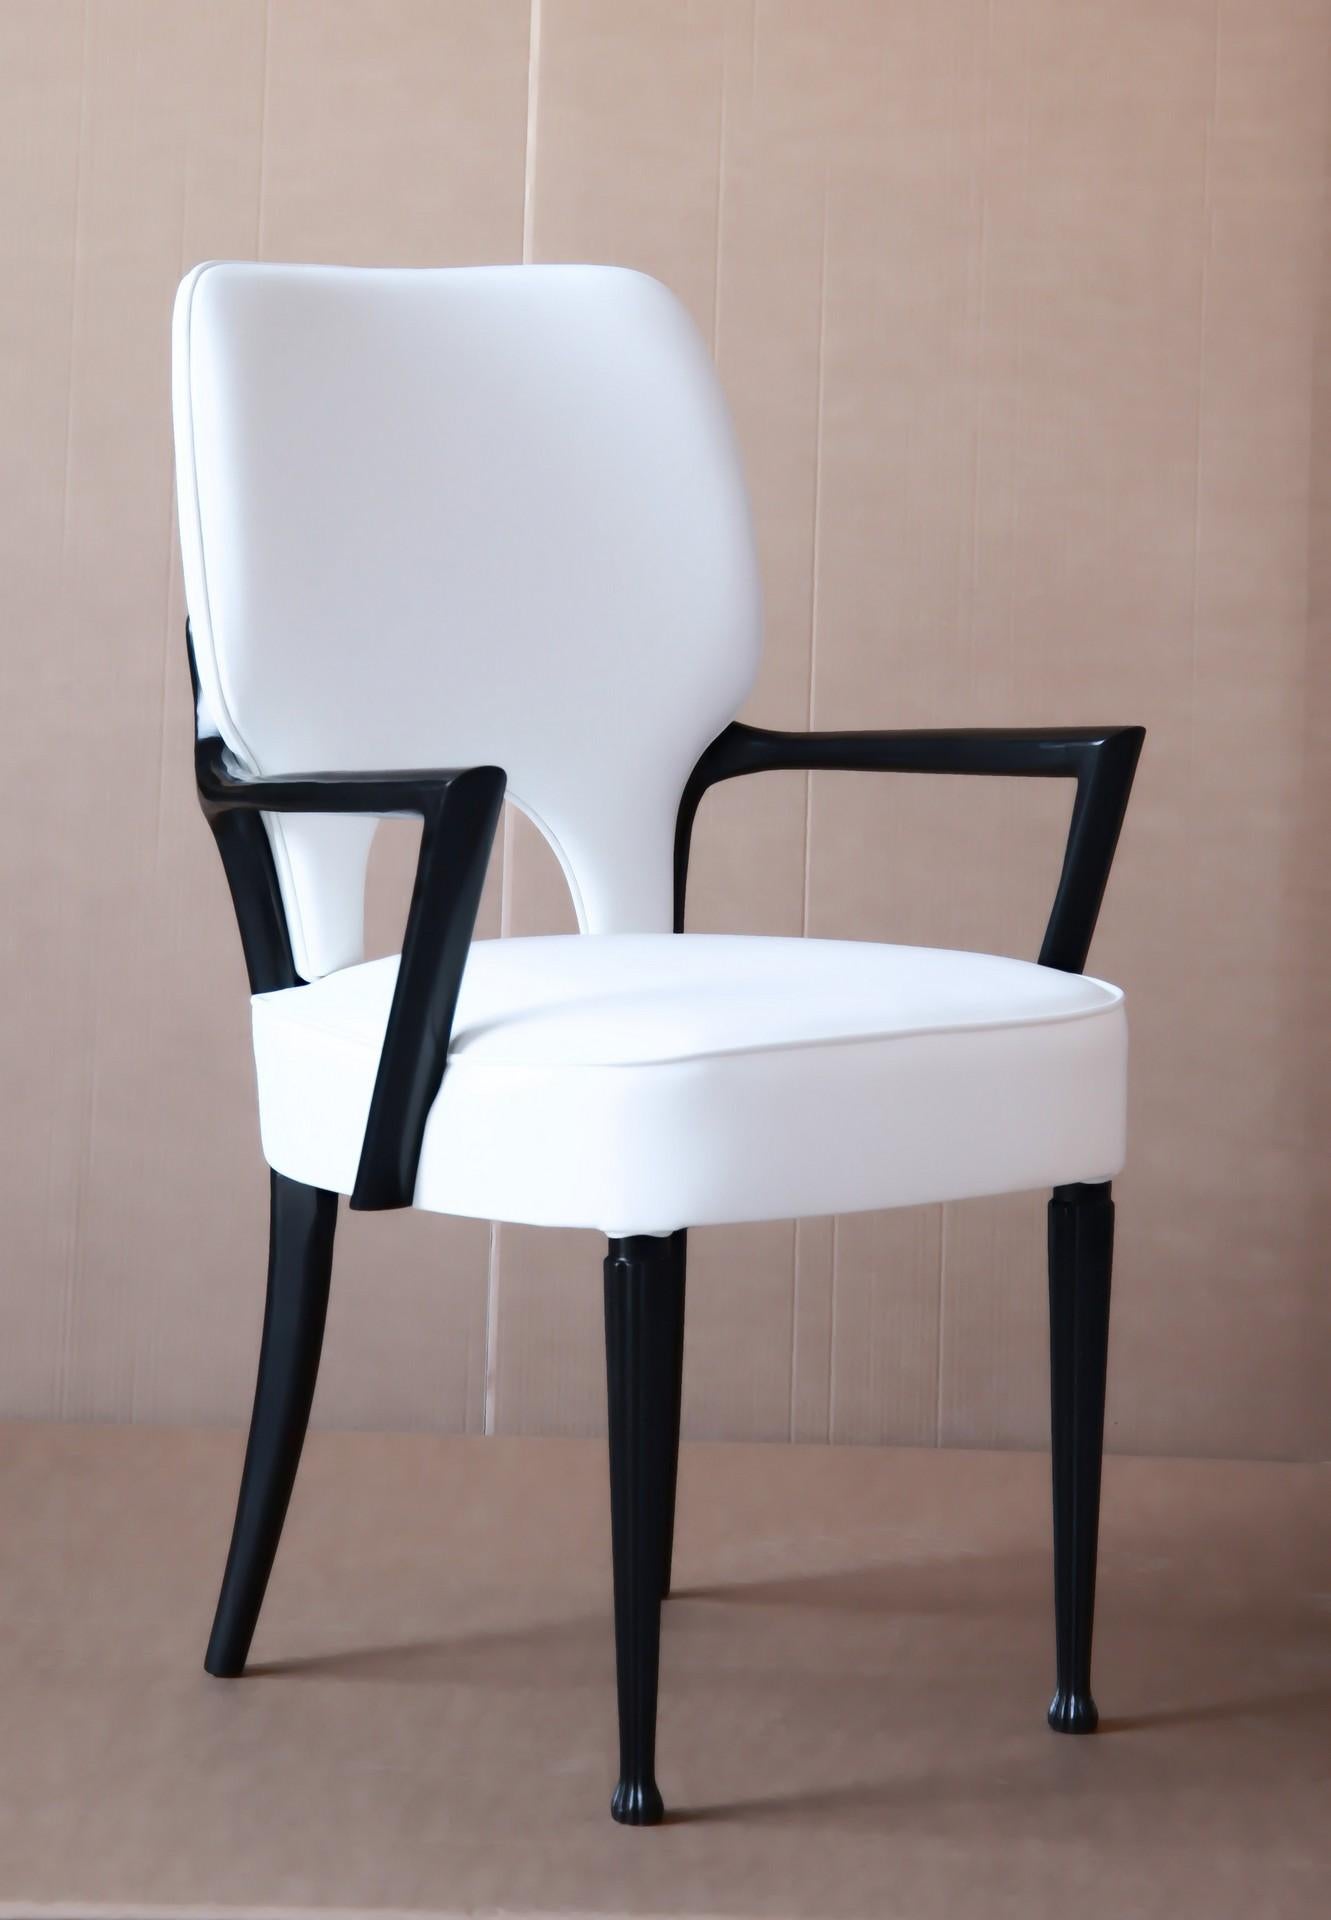 Charming modernist design armchair. Perfect dining arm-chair. The Silhouette design is organic and rounded on both the visible wood on armrest and legs and the upholstered part.
Curves on upholstery are gently highlighted with a same leather piping.